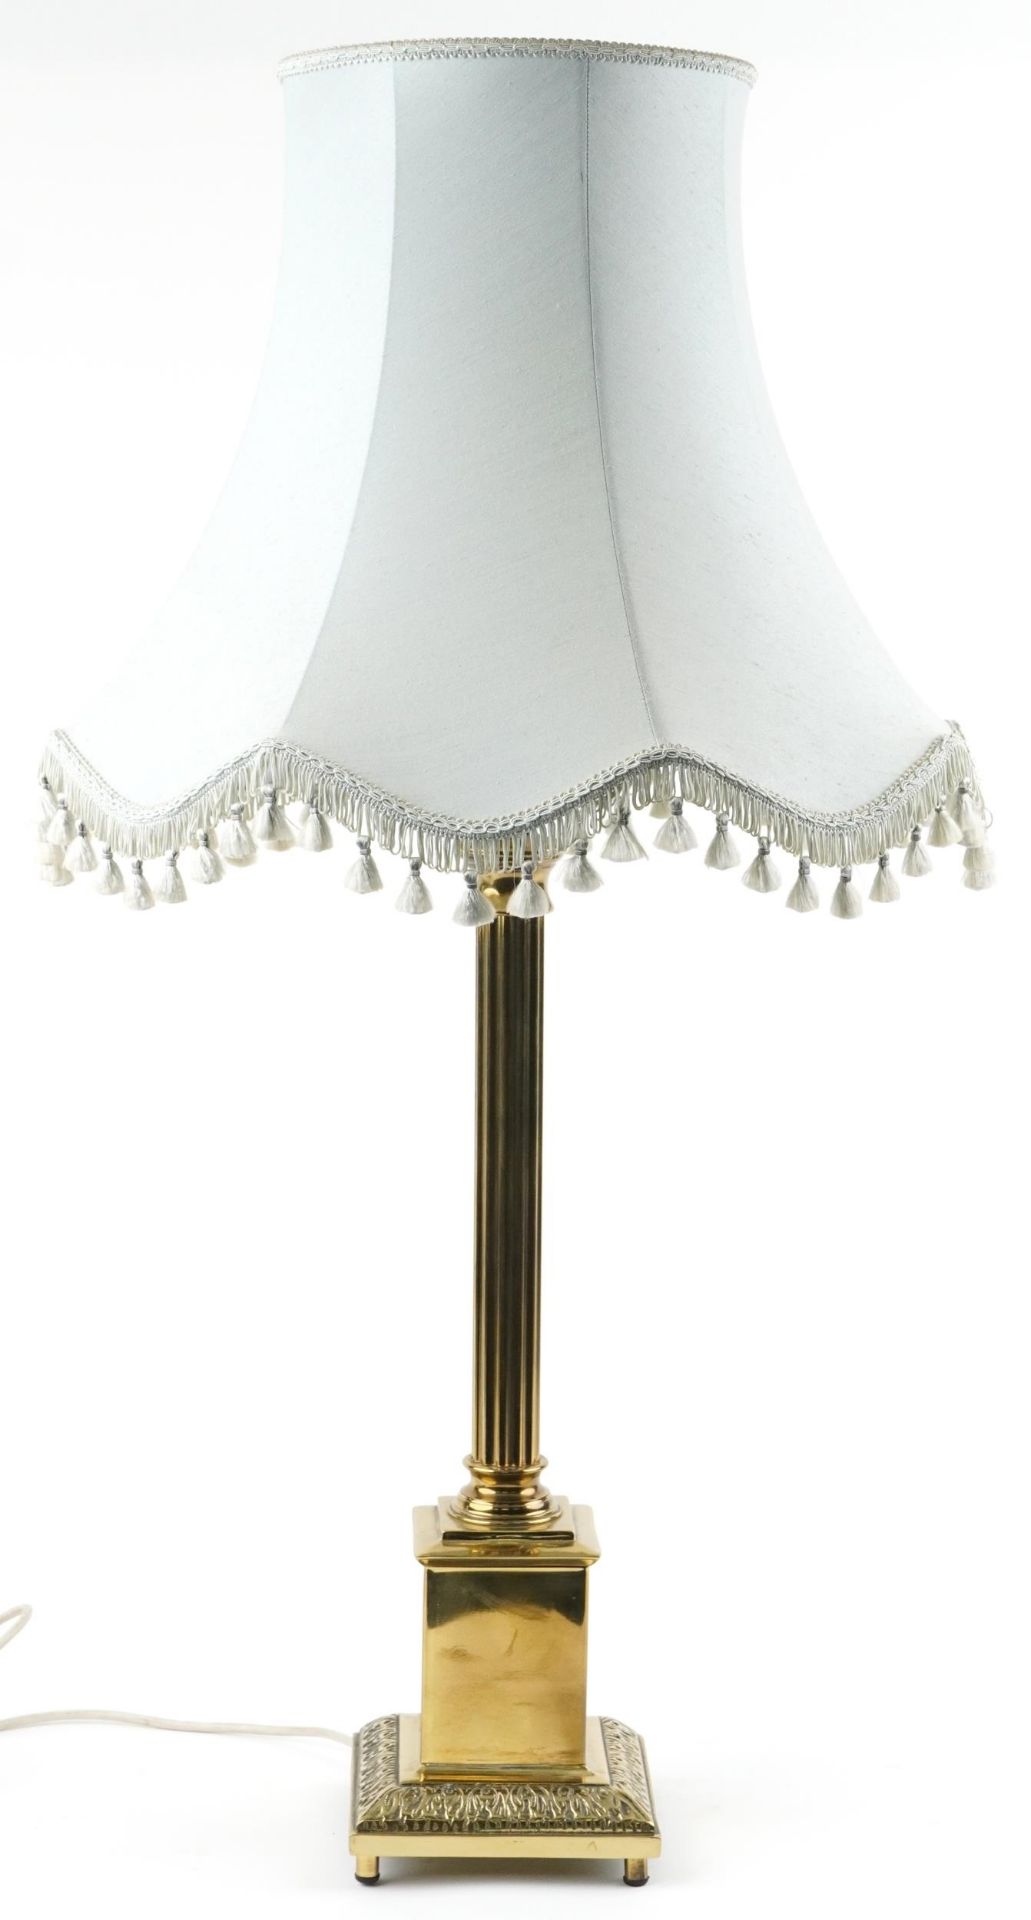 Large 19th century style brass Corinthian column table lamp with shade, overall 98cm high